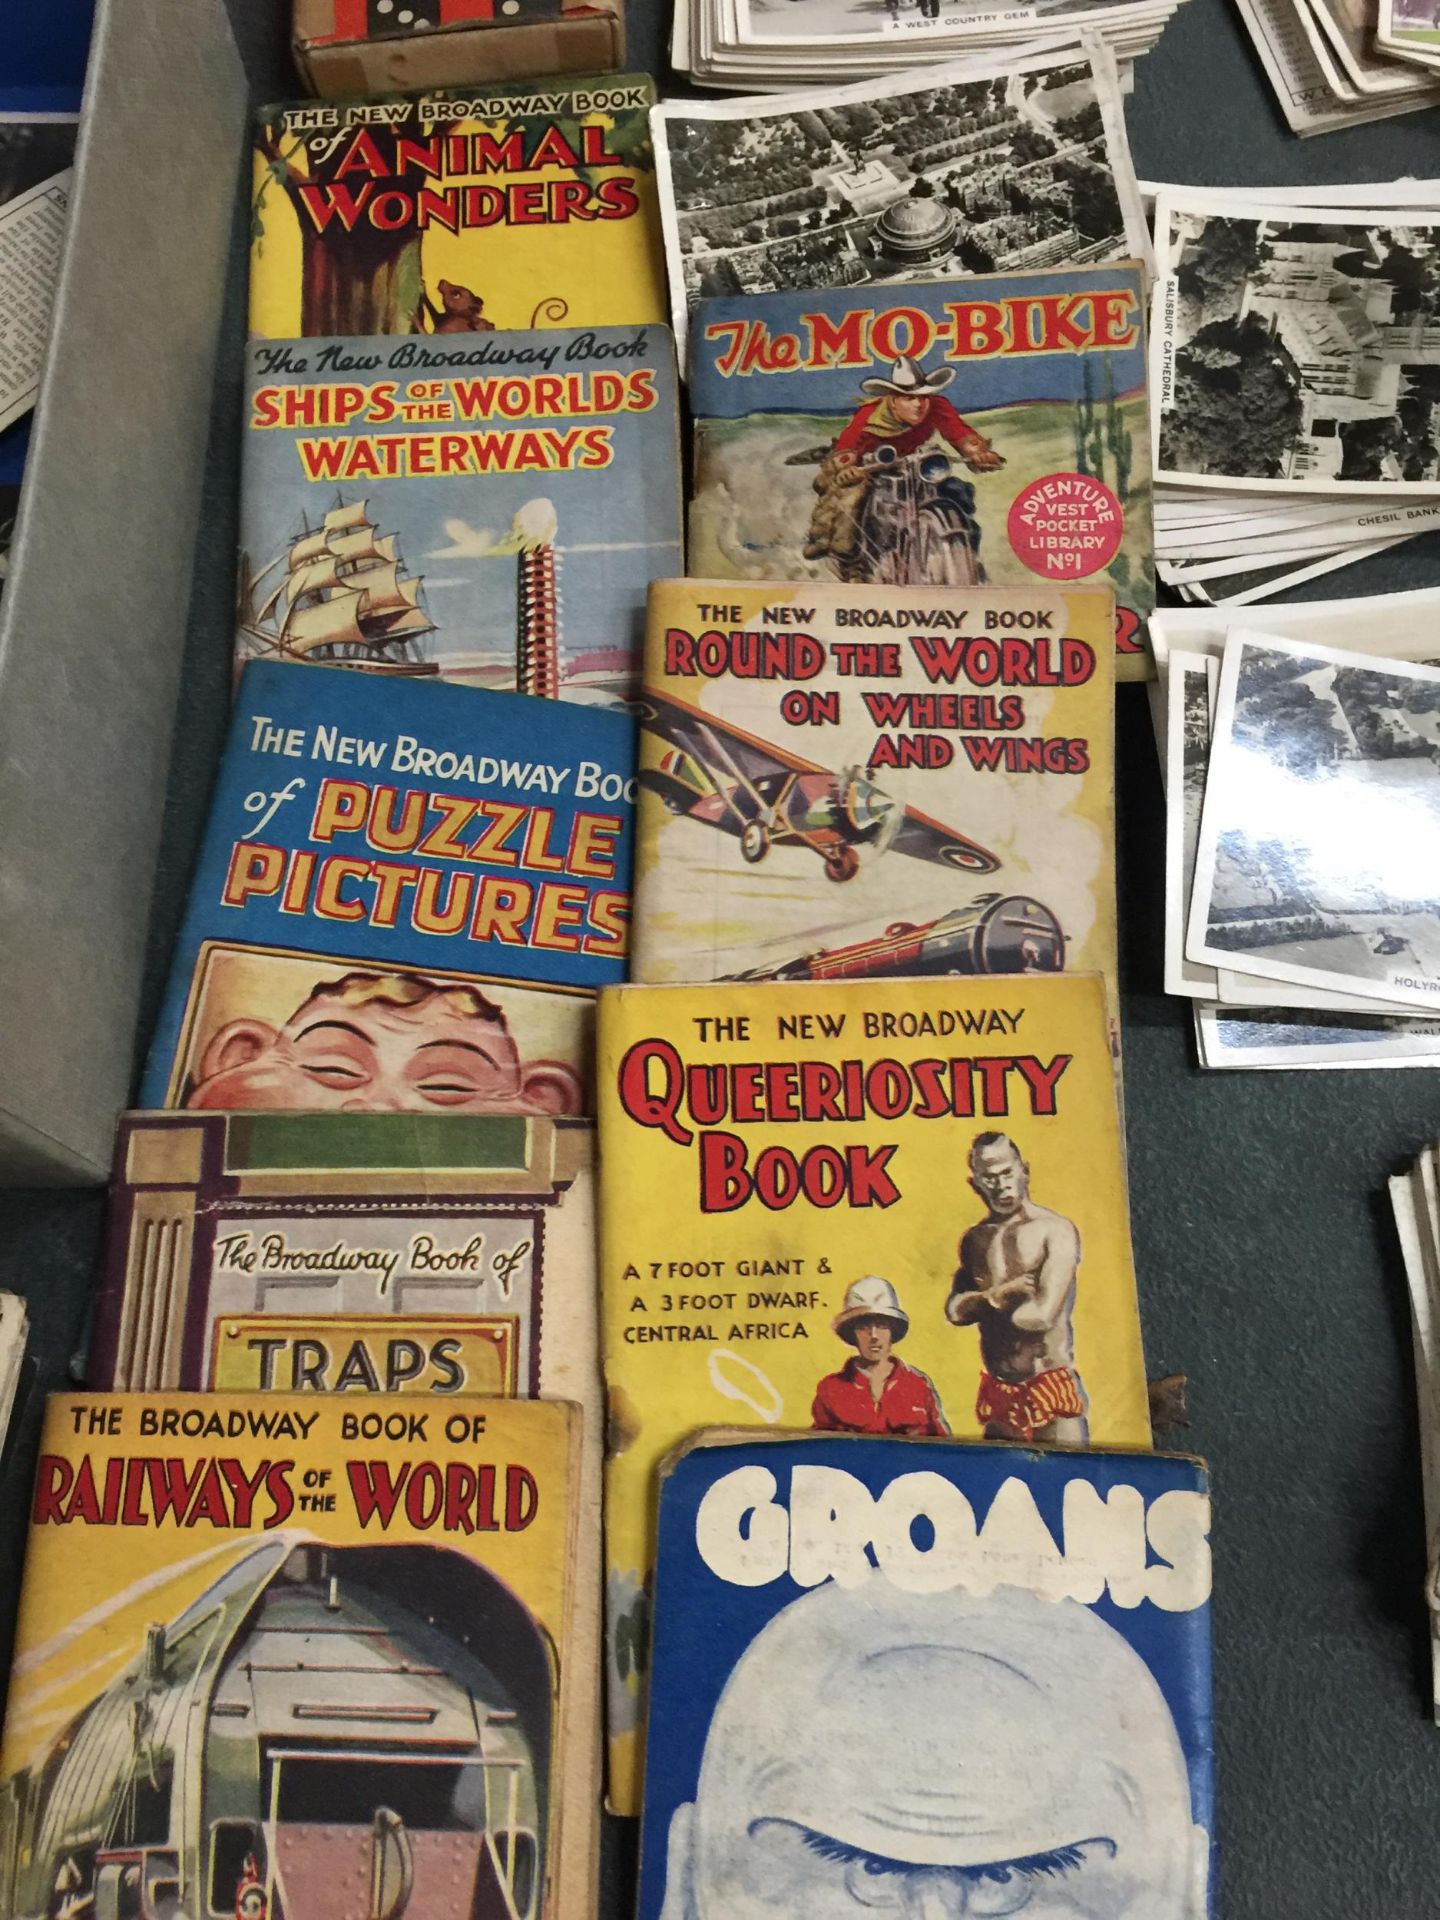 A COLLECTION OF VINTAGE BROADWAY BOOKS, CIGARETTE CARDS, LOOSE STAMPS ETC - Image 2 of 4